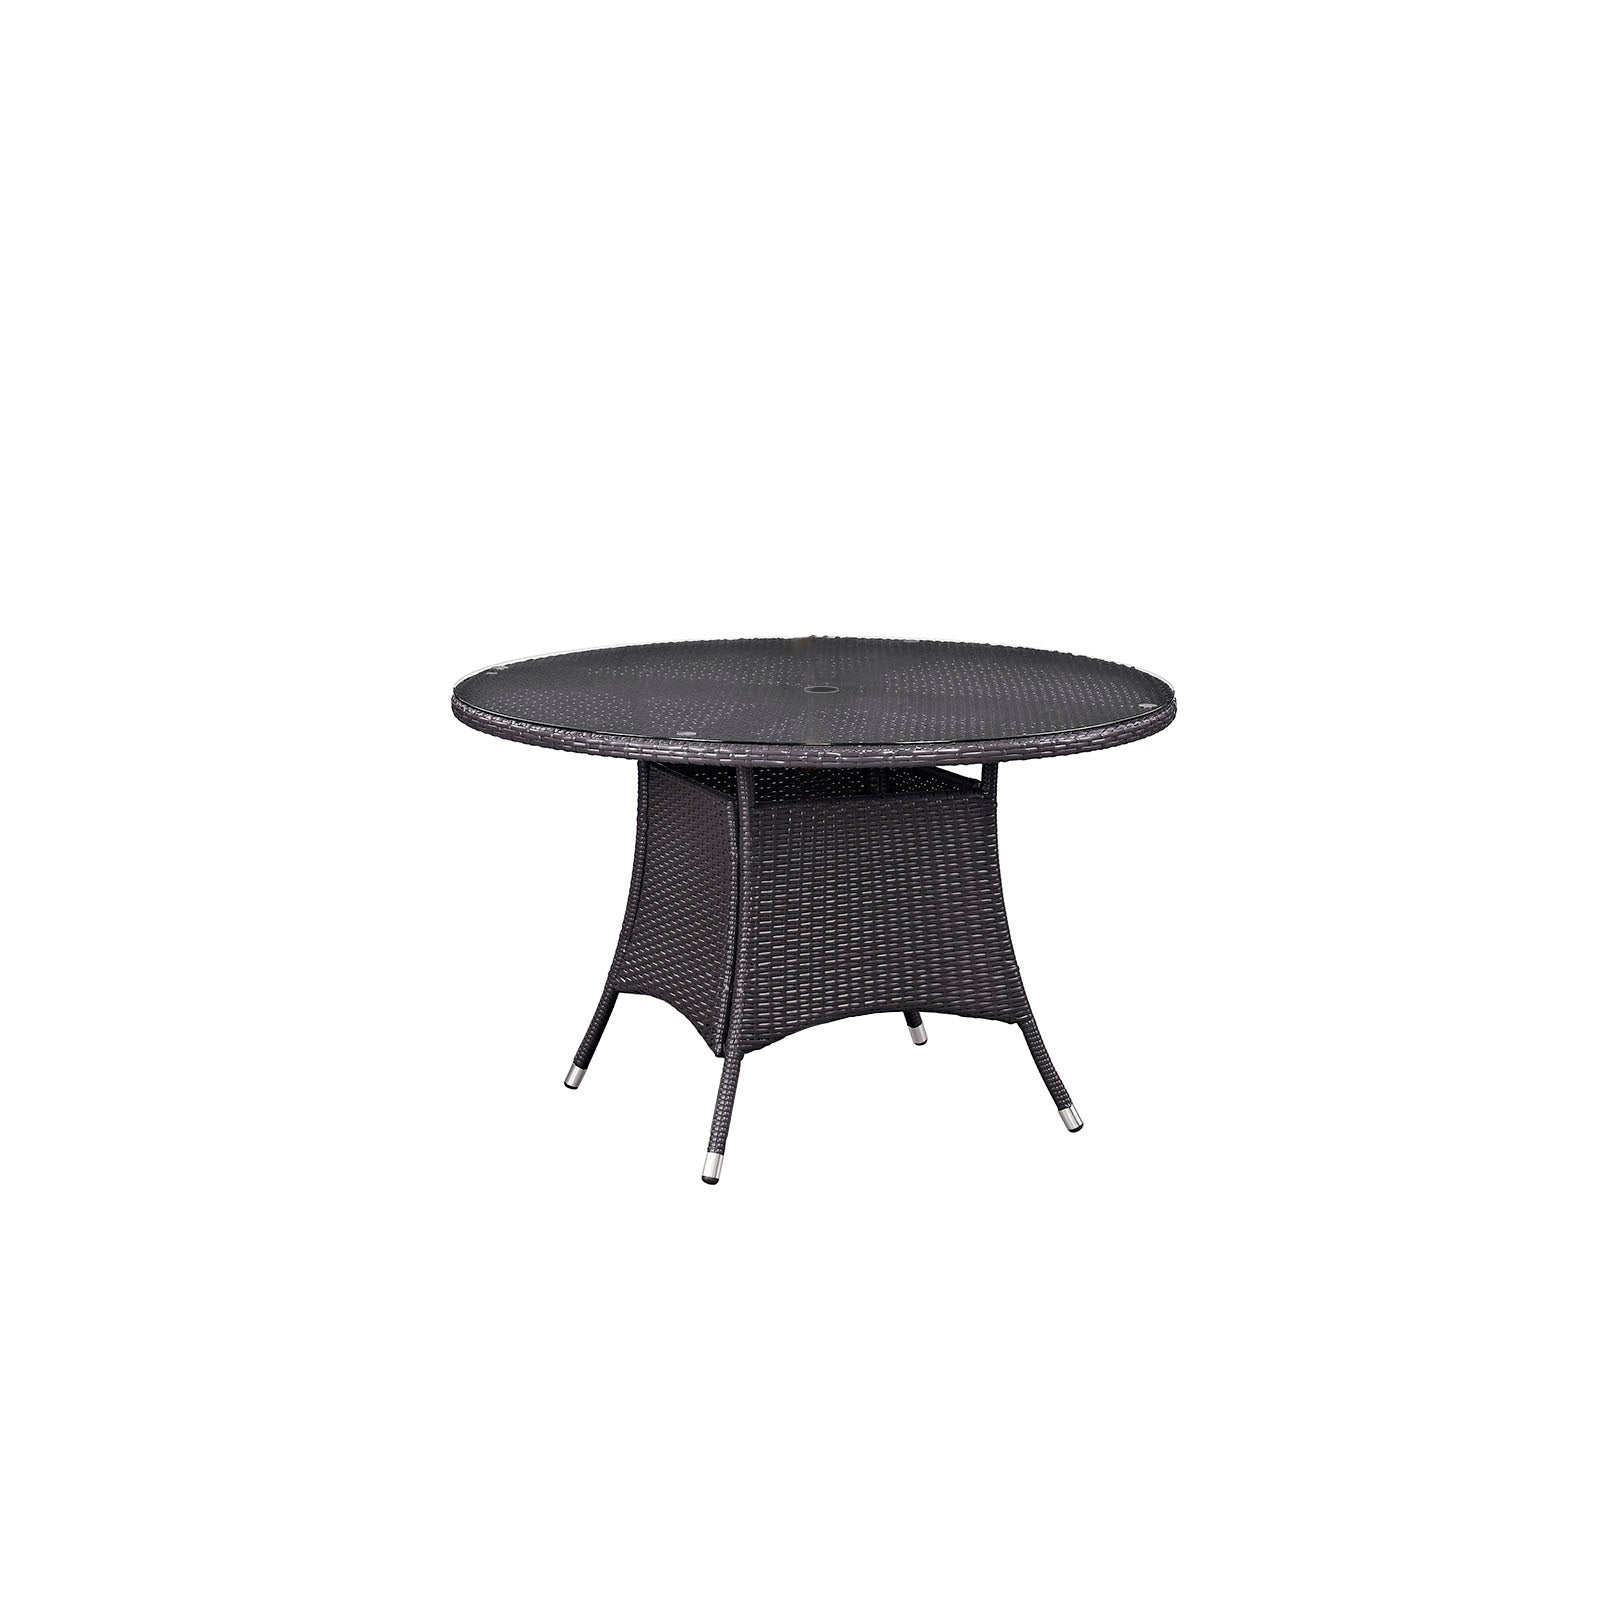 Convene 47" Round Outdoor Patio Dining Table - East Shore Modern Home Furnishings